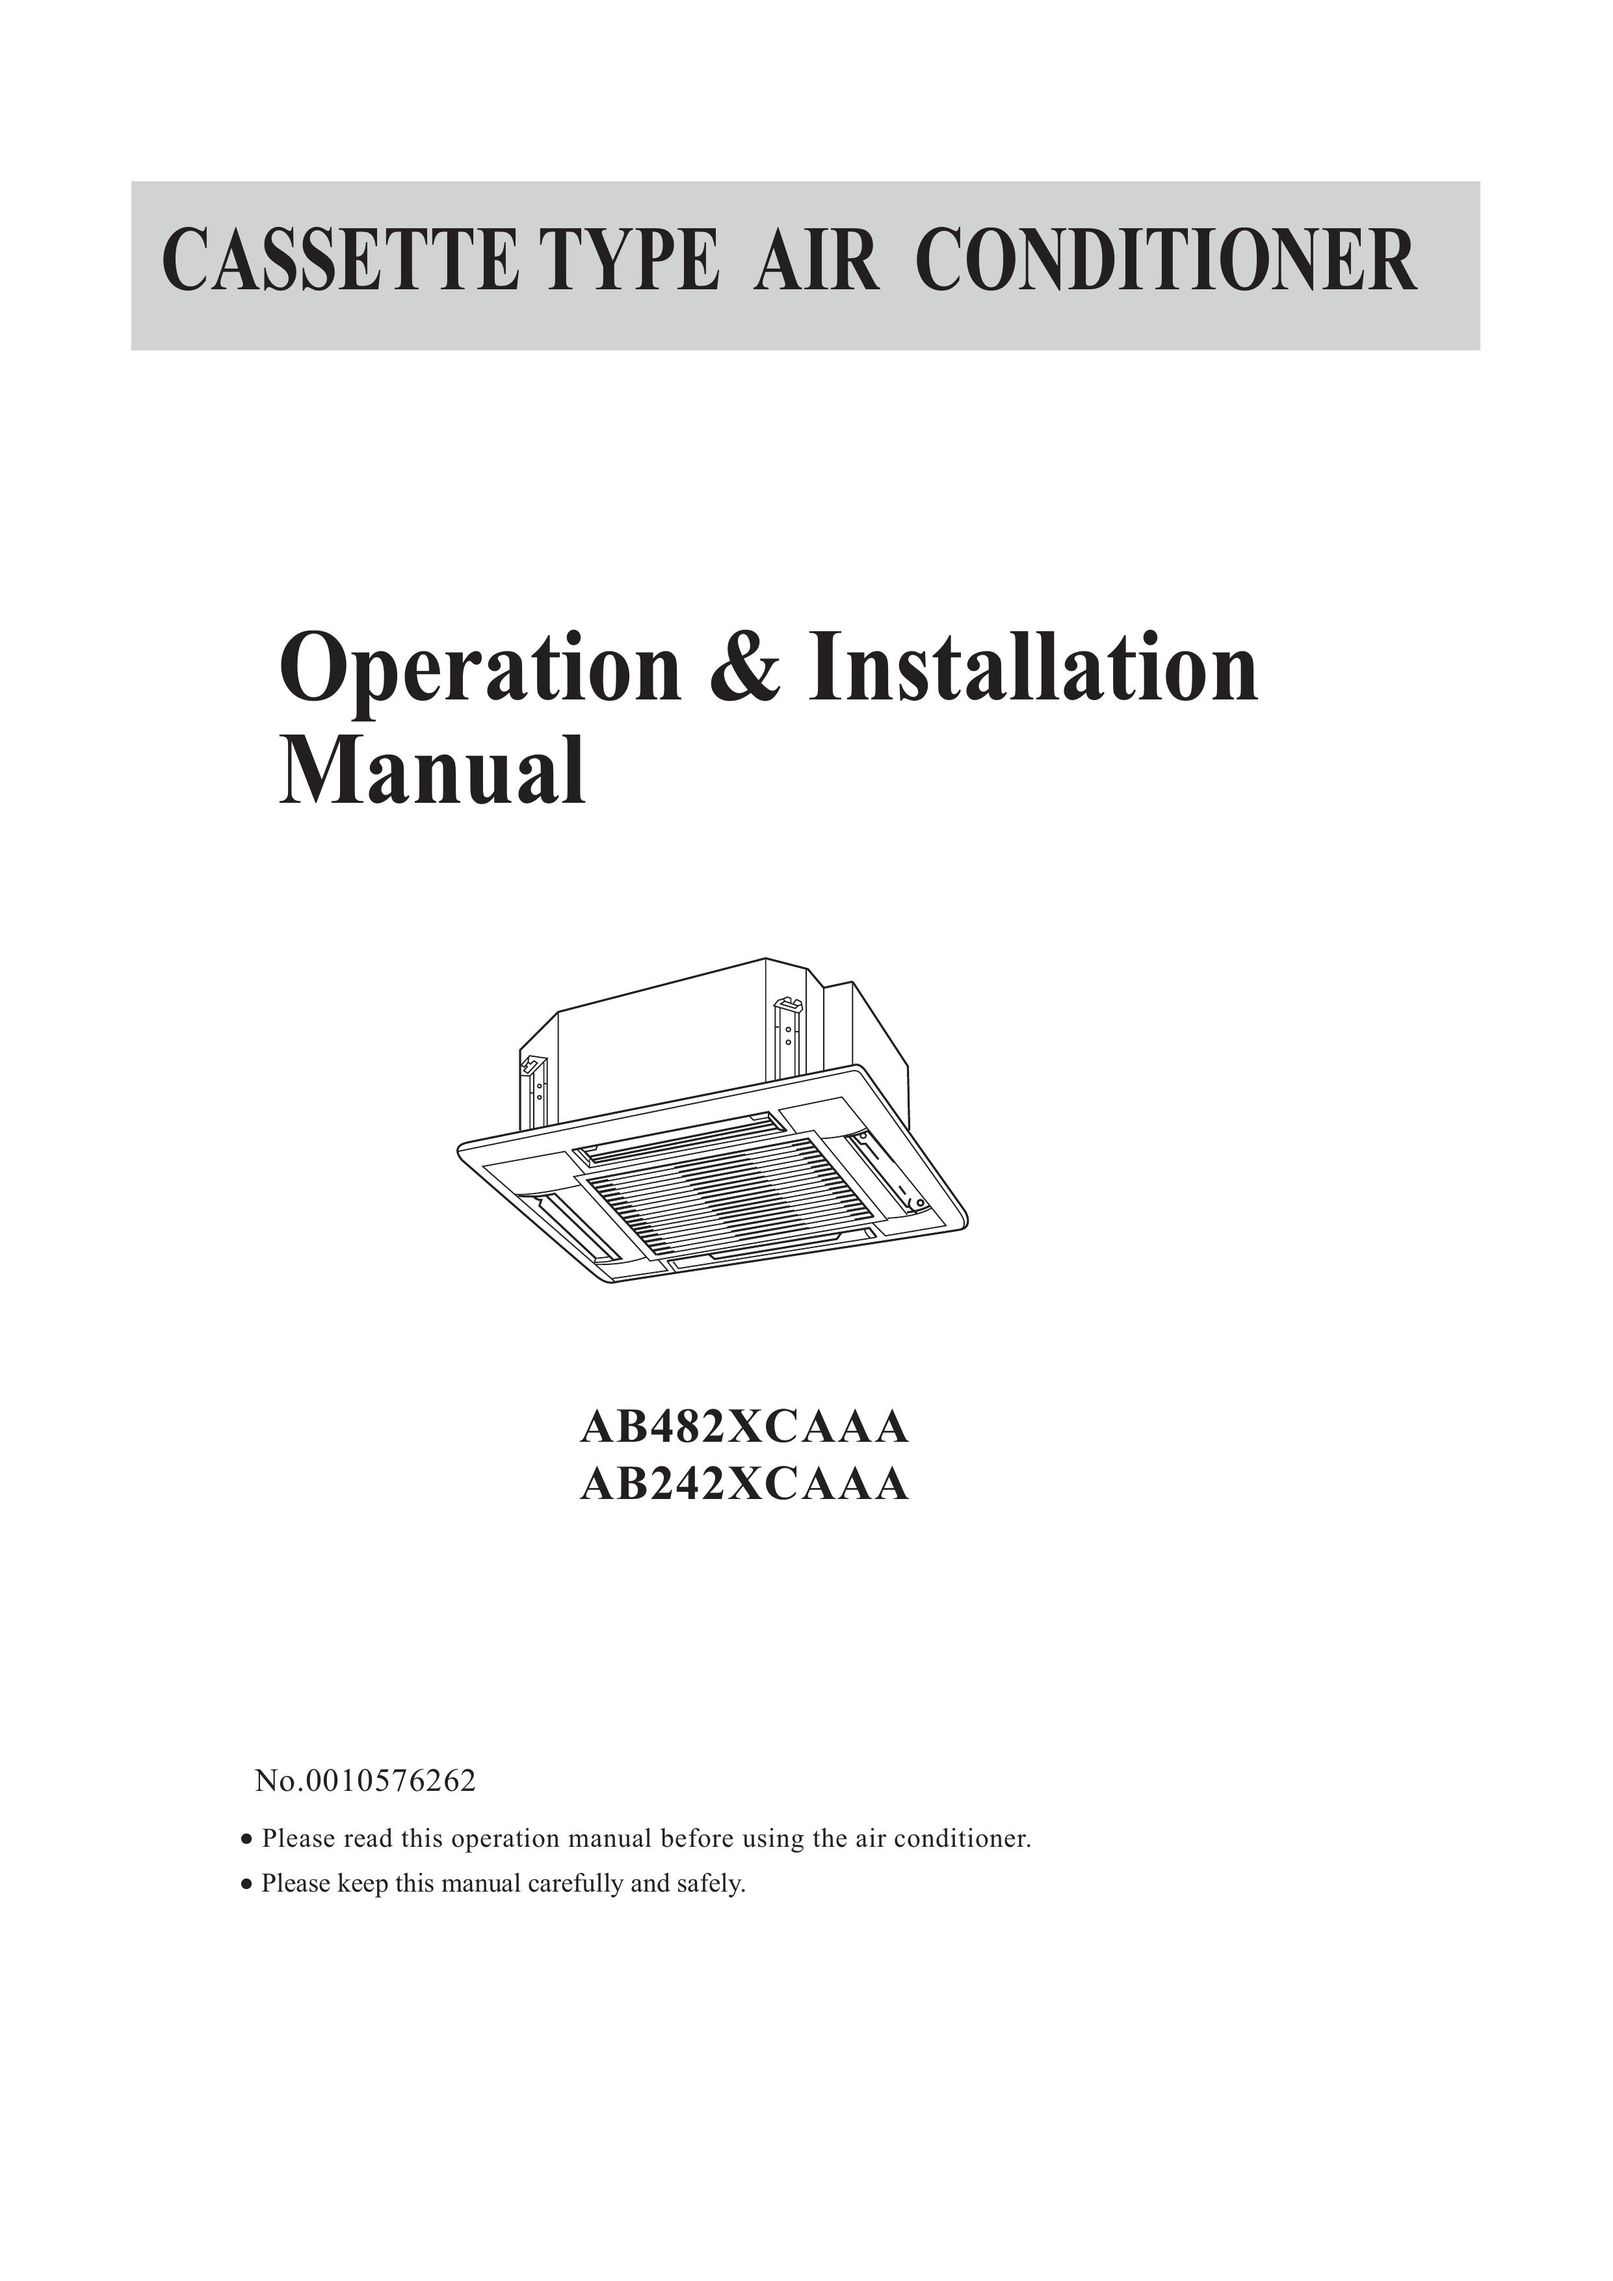 Haier AB242XCAAA Air Conditioner User Manual